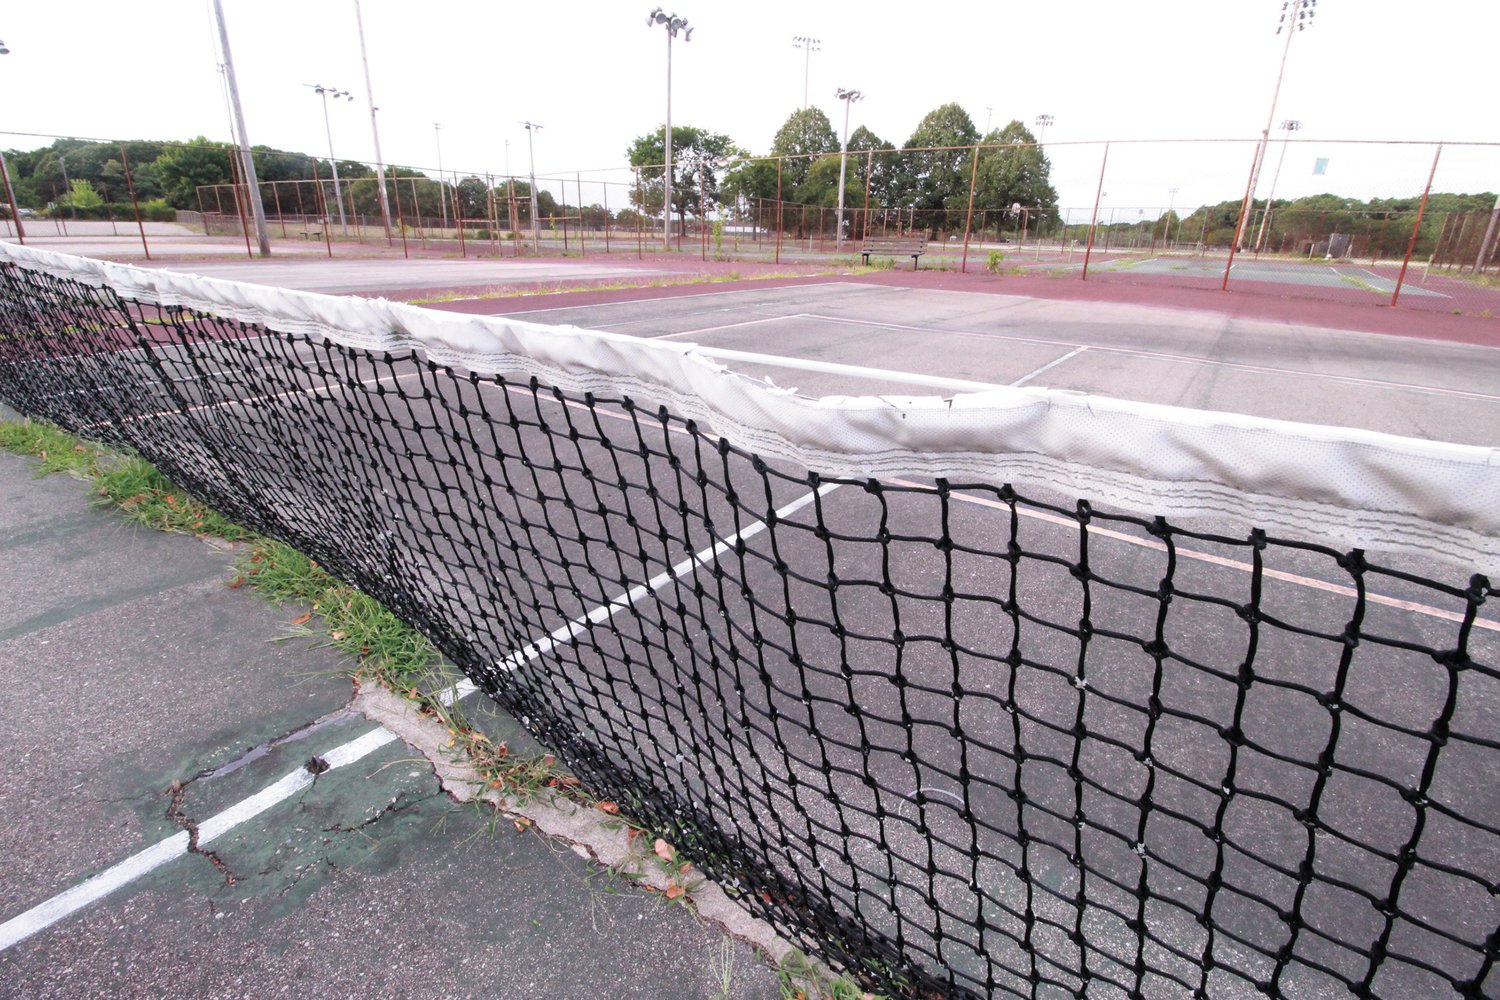 WEEDY COURTS: The tennis and basketball courts at Mickey Stevens Sports Complex are showing their age. When this picture was taken Sunday afternoon, no one was to be found except for a man shooting baskets. “I do it to clear my head,” he said. (Warwick Beacon photo)